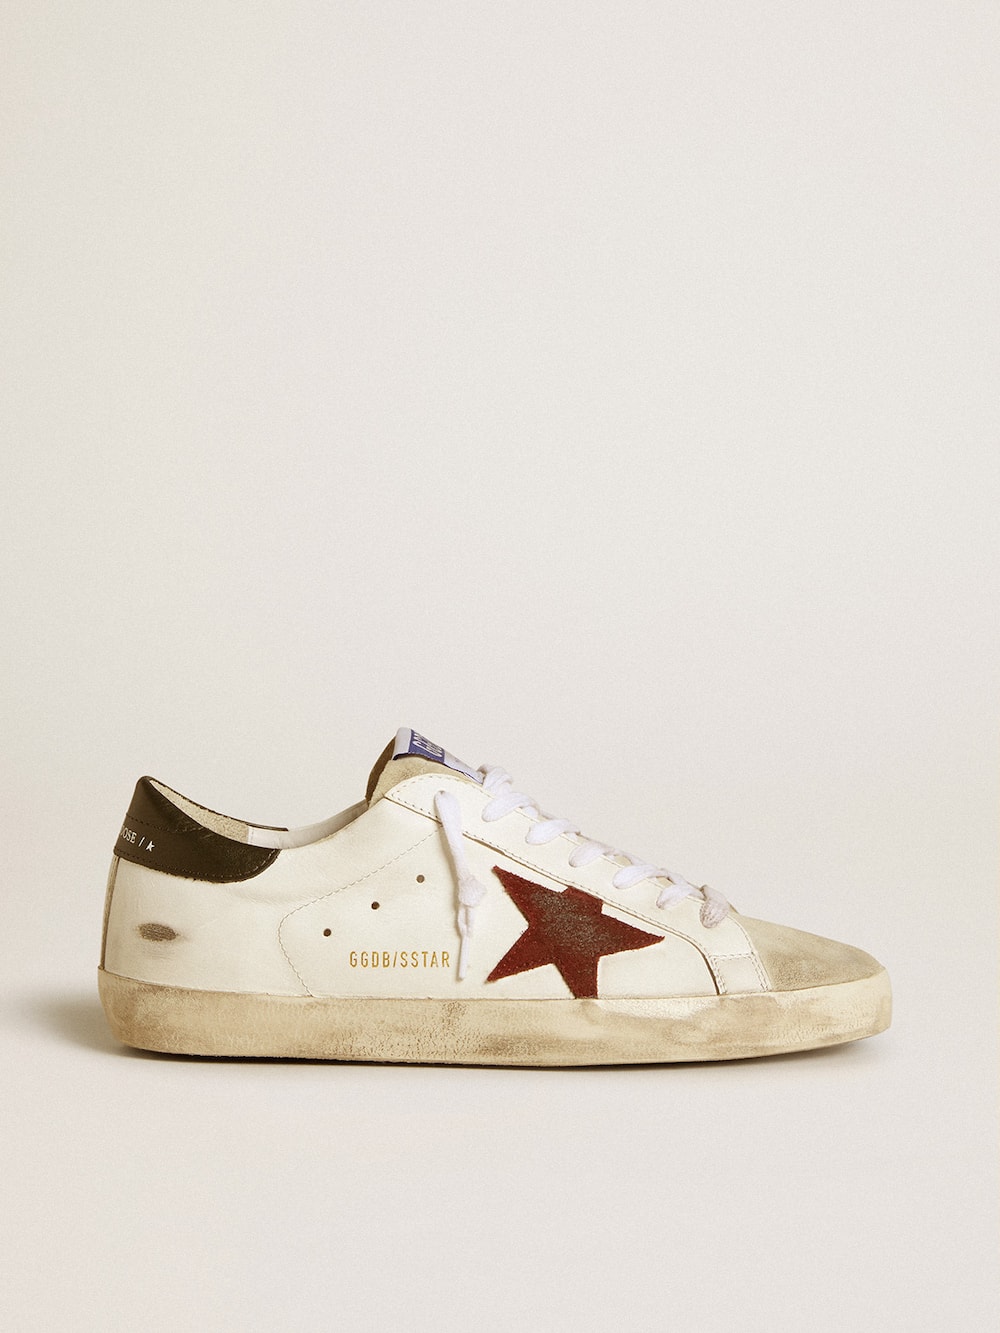 Golden Goose - Men's Super-Star with earth-brown suede star and dark green leather heel tab in 